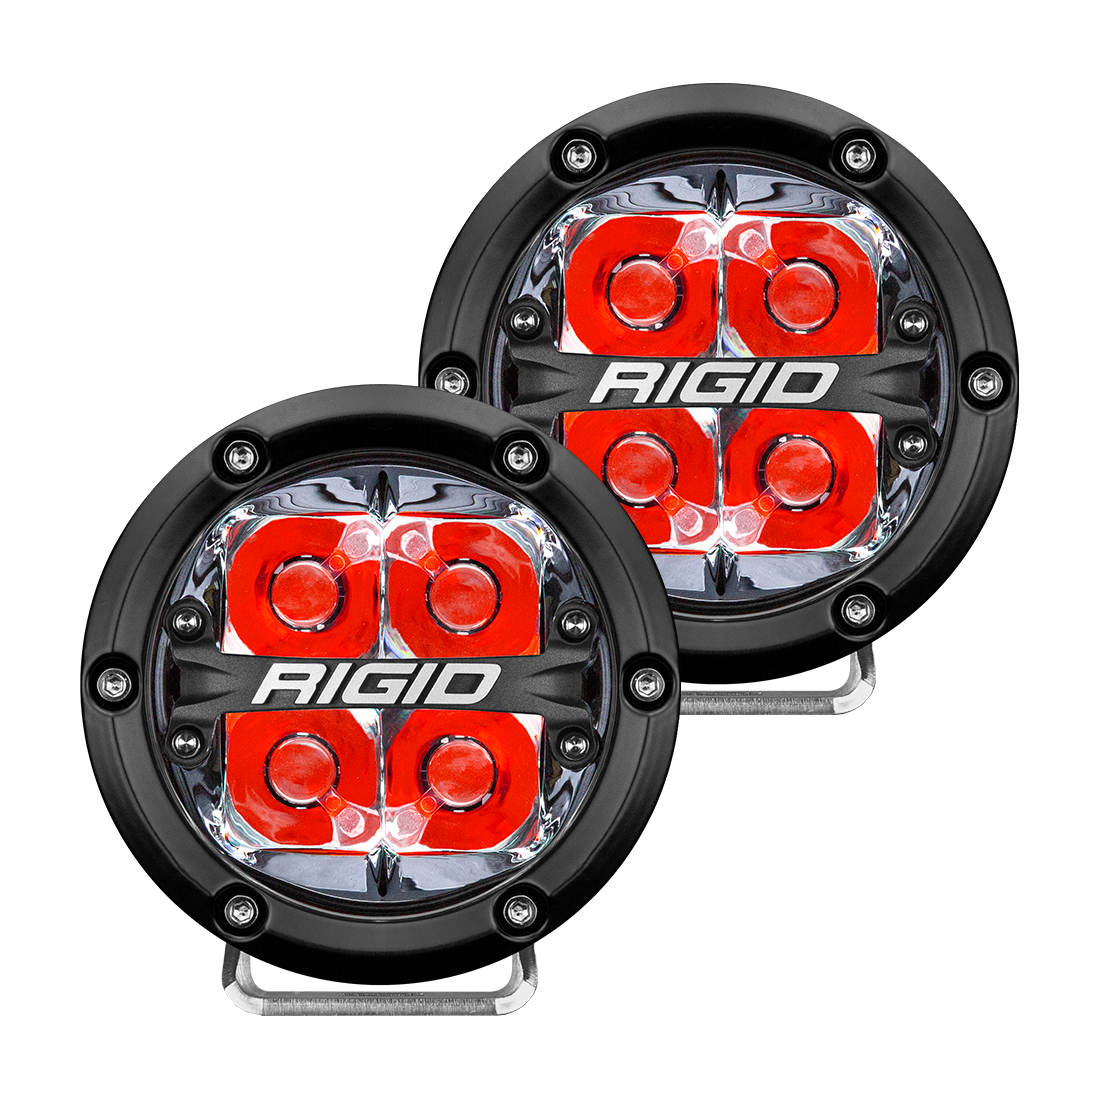 Rigid Industries 360-Series 4 Inch Led Off-Road Spot Beam Red Backlight Pair